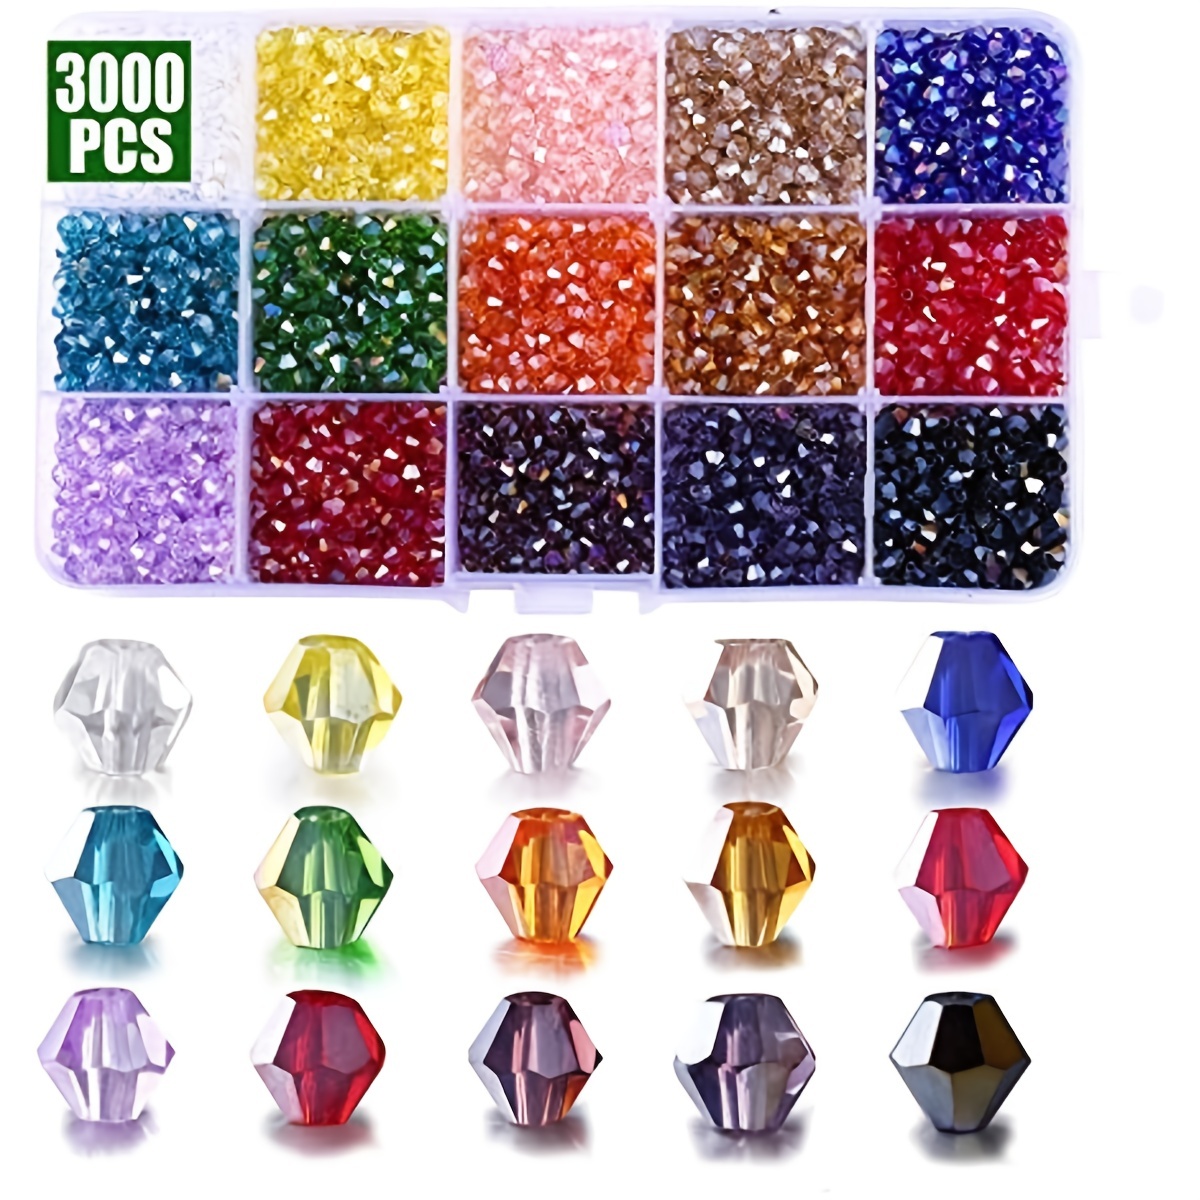 1000 Pieces Crystal Beads for Jewelry Making Faceted Bicone Cube Crystal  Glass Beads Bracelet Making Kit Loose Beads Briollete Rondelle Spacer Beads  for DIY Bracelets Necklace Pendants Making Supplies